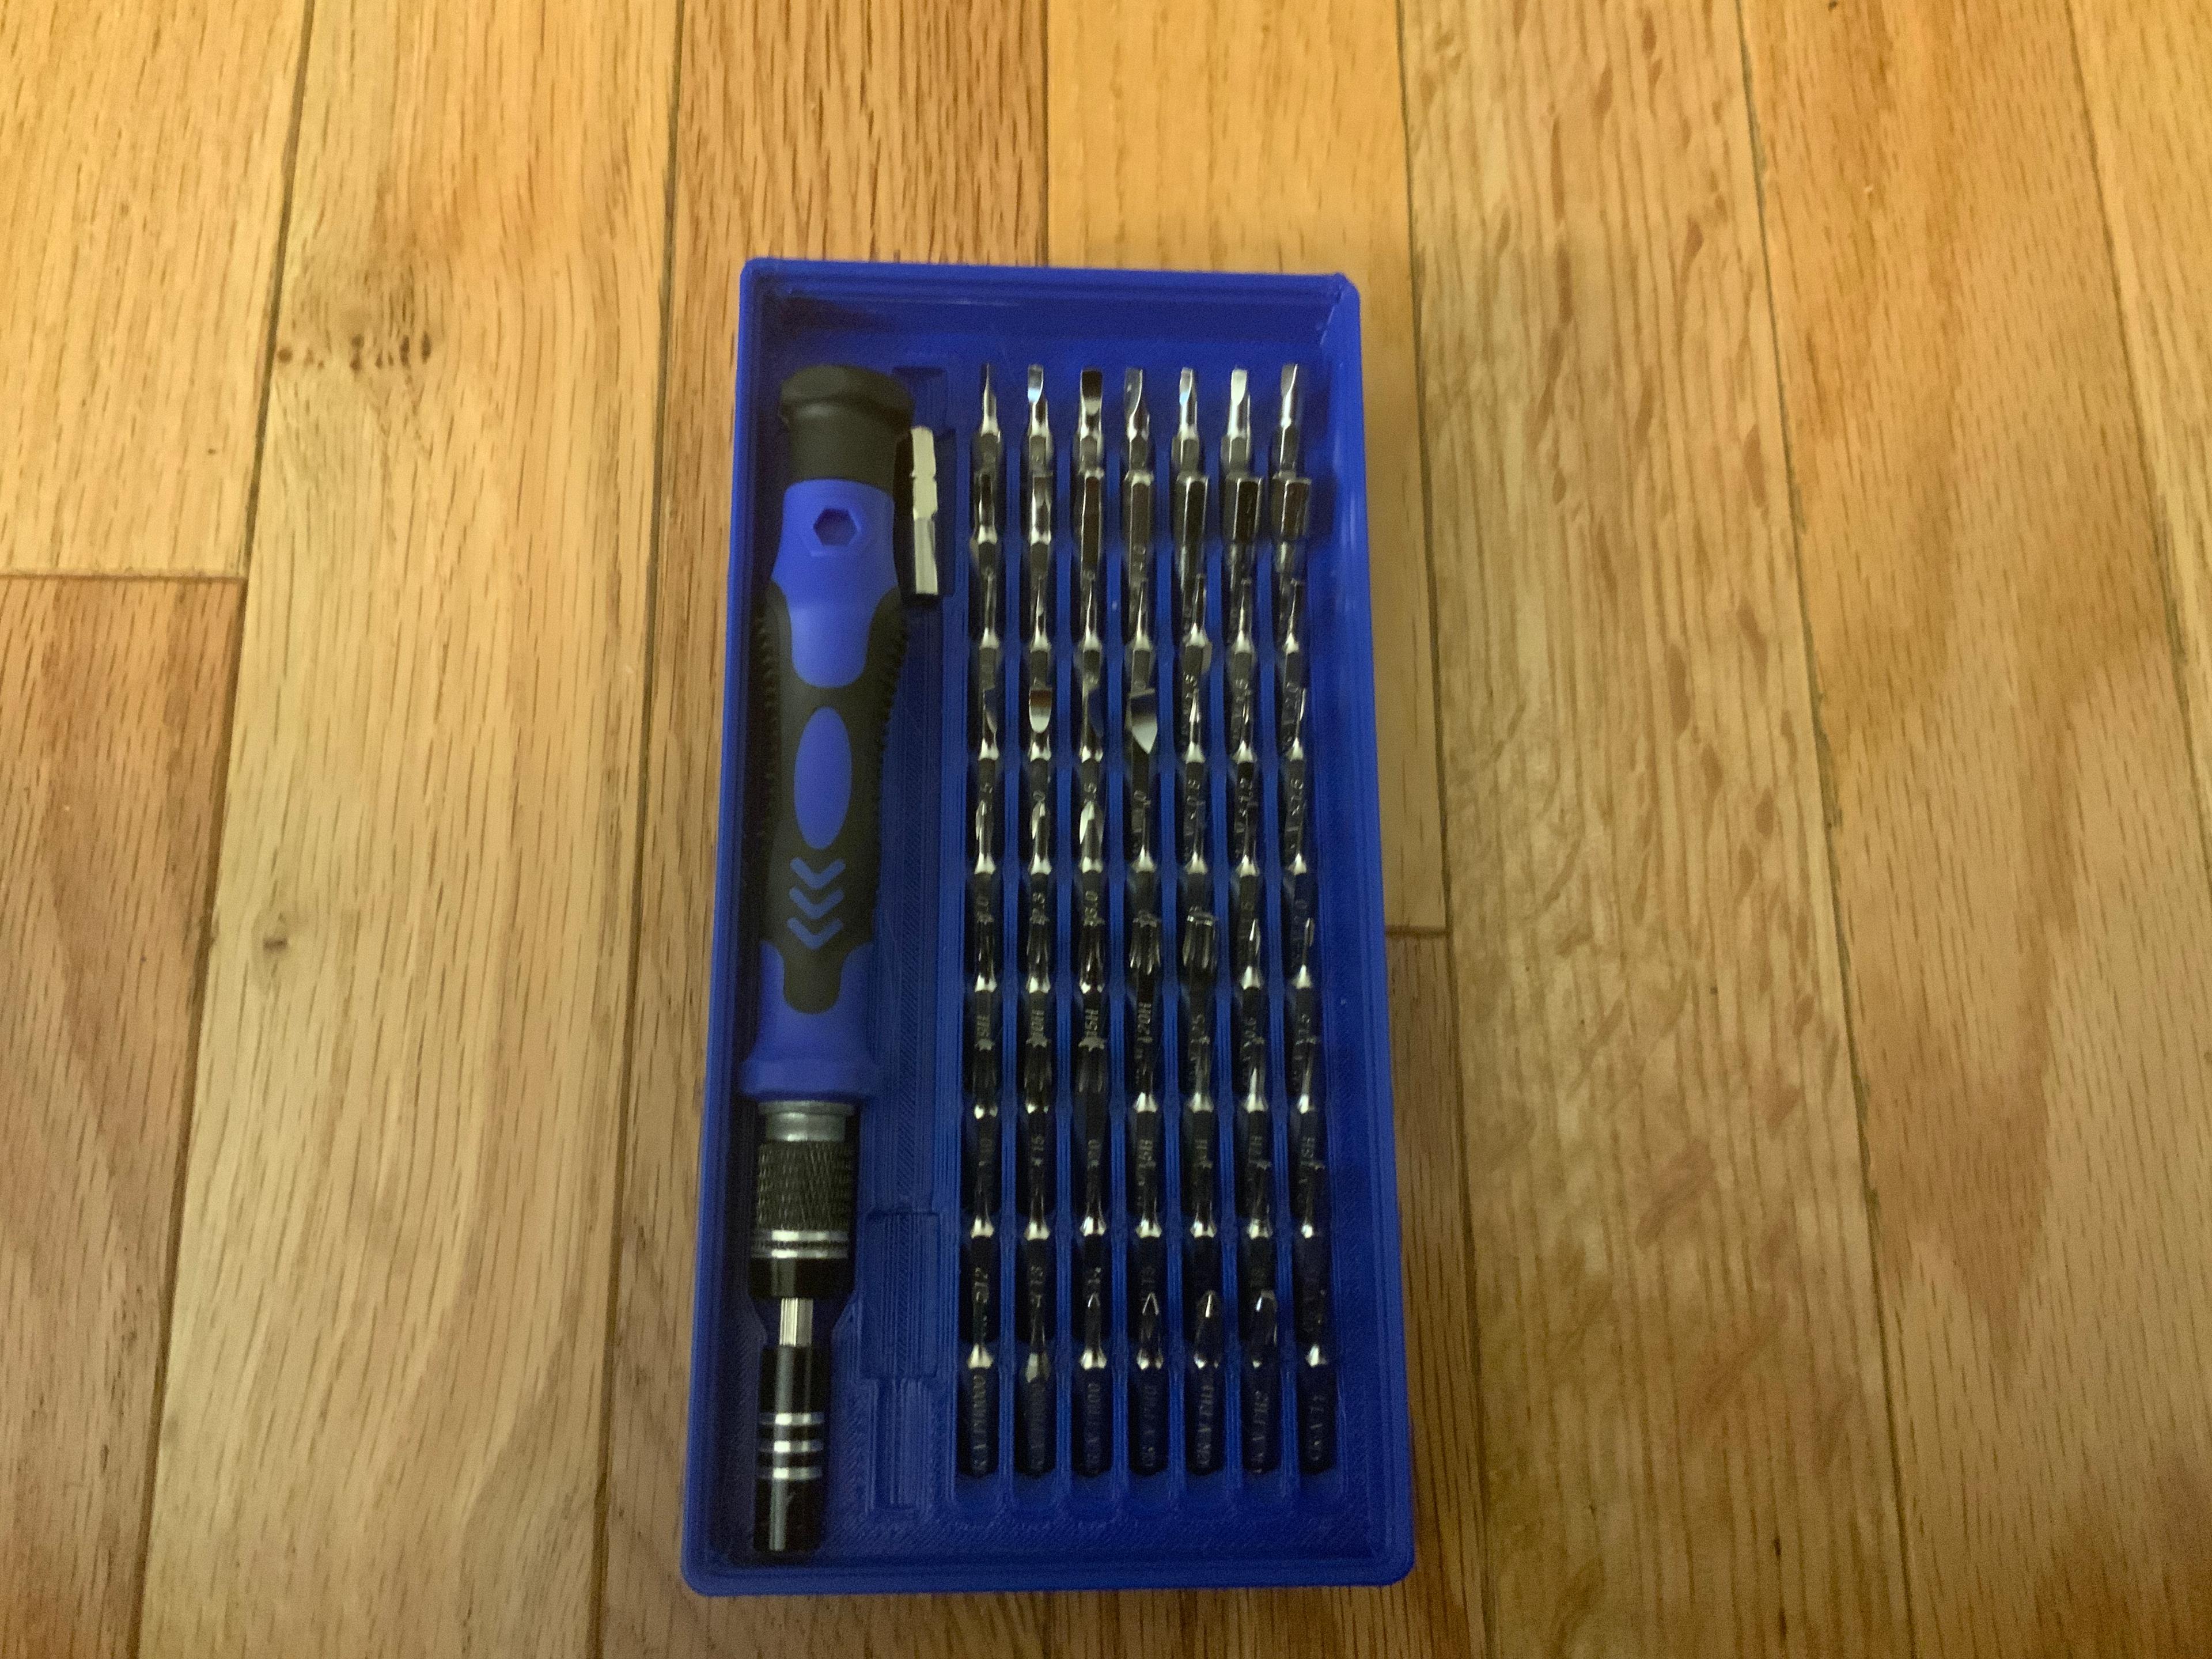 Gridfinity iFixit Mako + ES121 Screwdriver Holders - Took about 6hrs to print on Ender 3 at 0.28 layer and 0.6mm nozzle. Works well enough with my strebito ifixit knockoff set. - 3d model